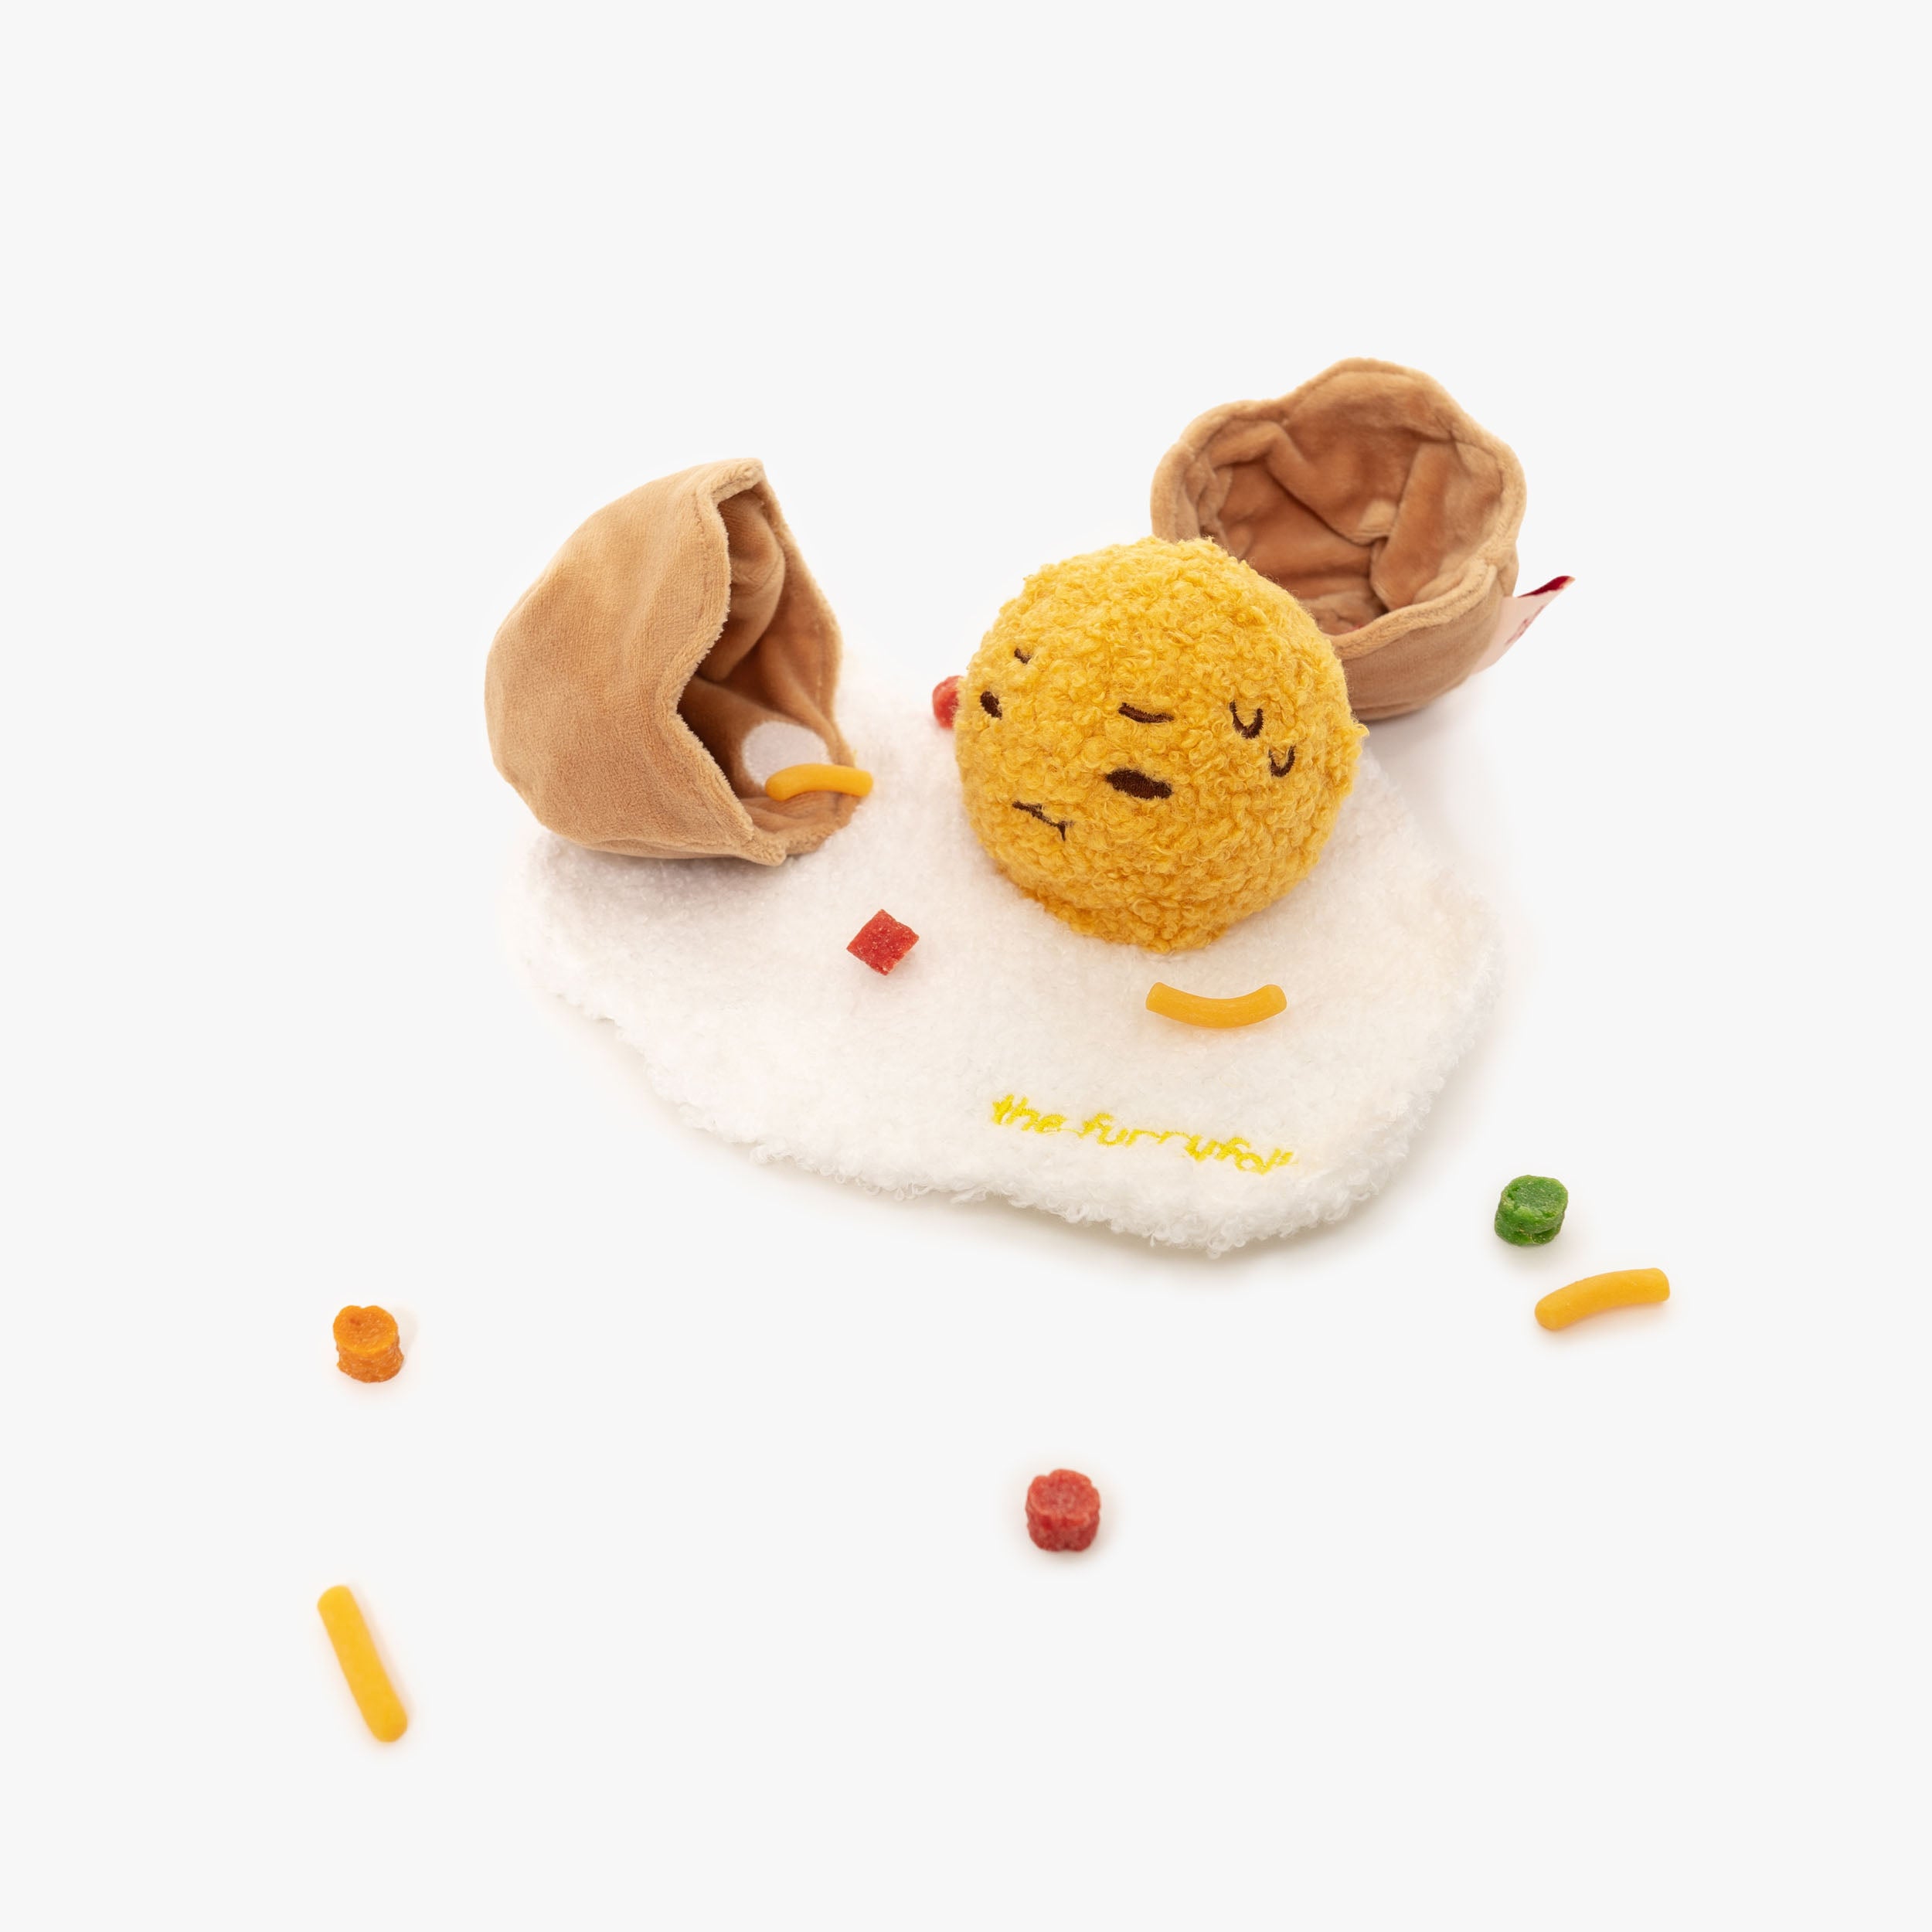 Engaging dog toy set featuring a charming plush egg with a smiling face, nestled on a white, fluffy base resembling an egg white. The toy is embroidered with 'The Furryfolks' branding, signaling quality and fun for pets.